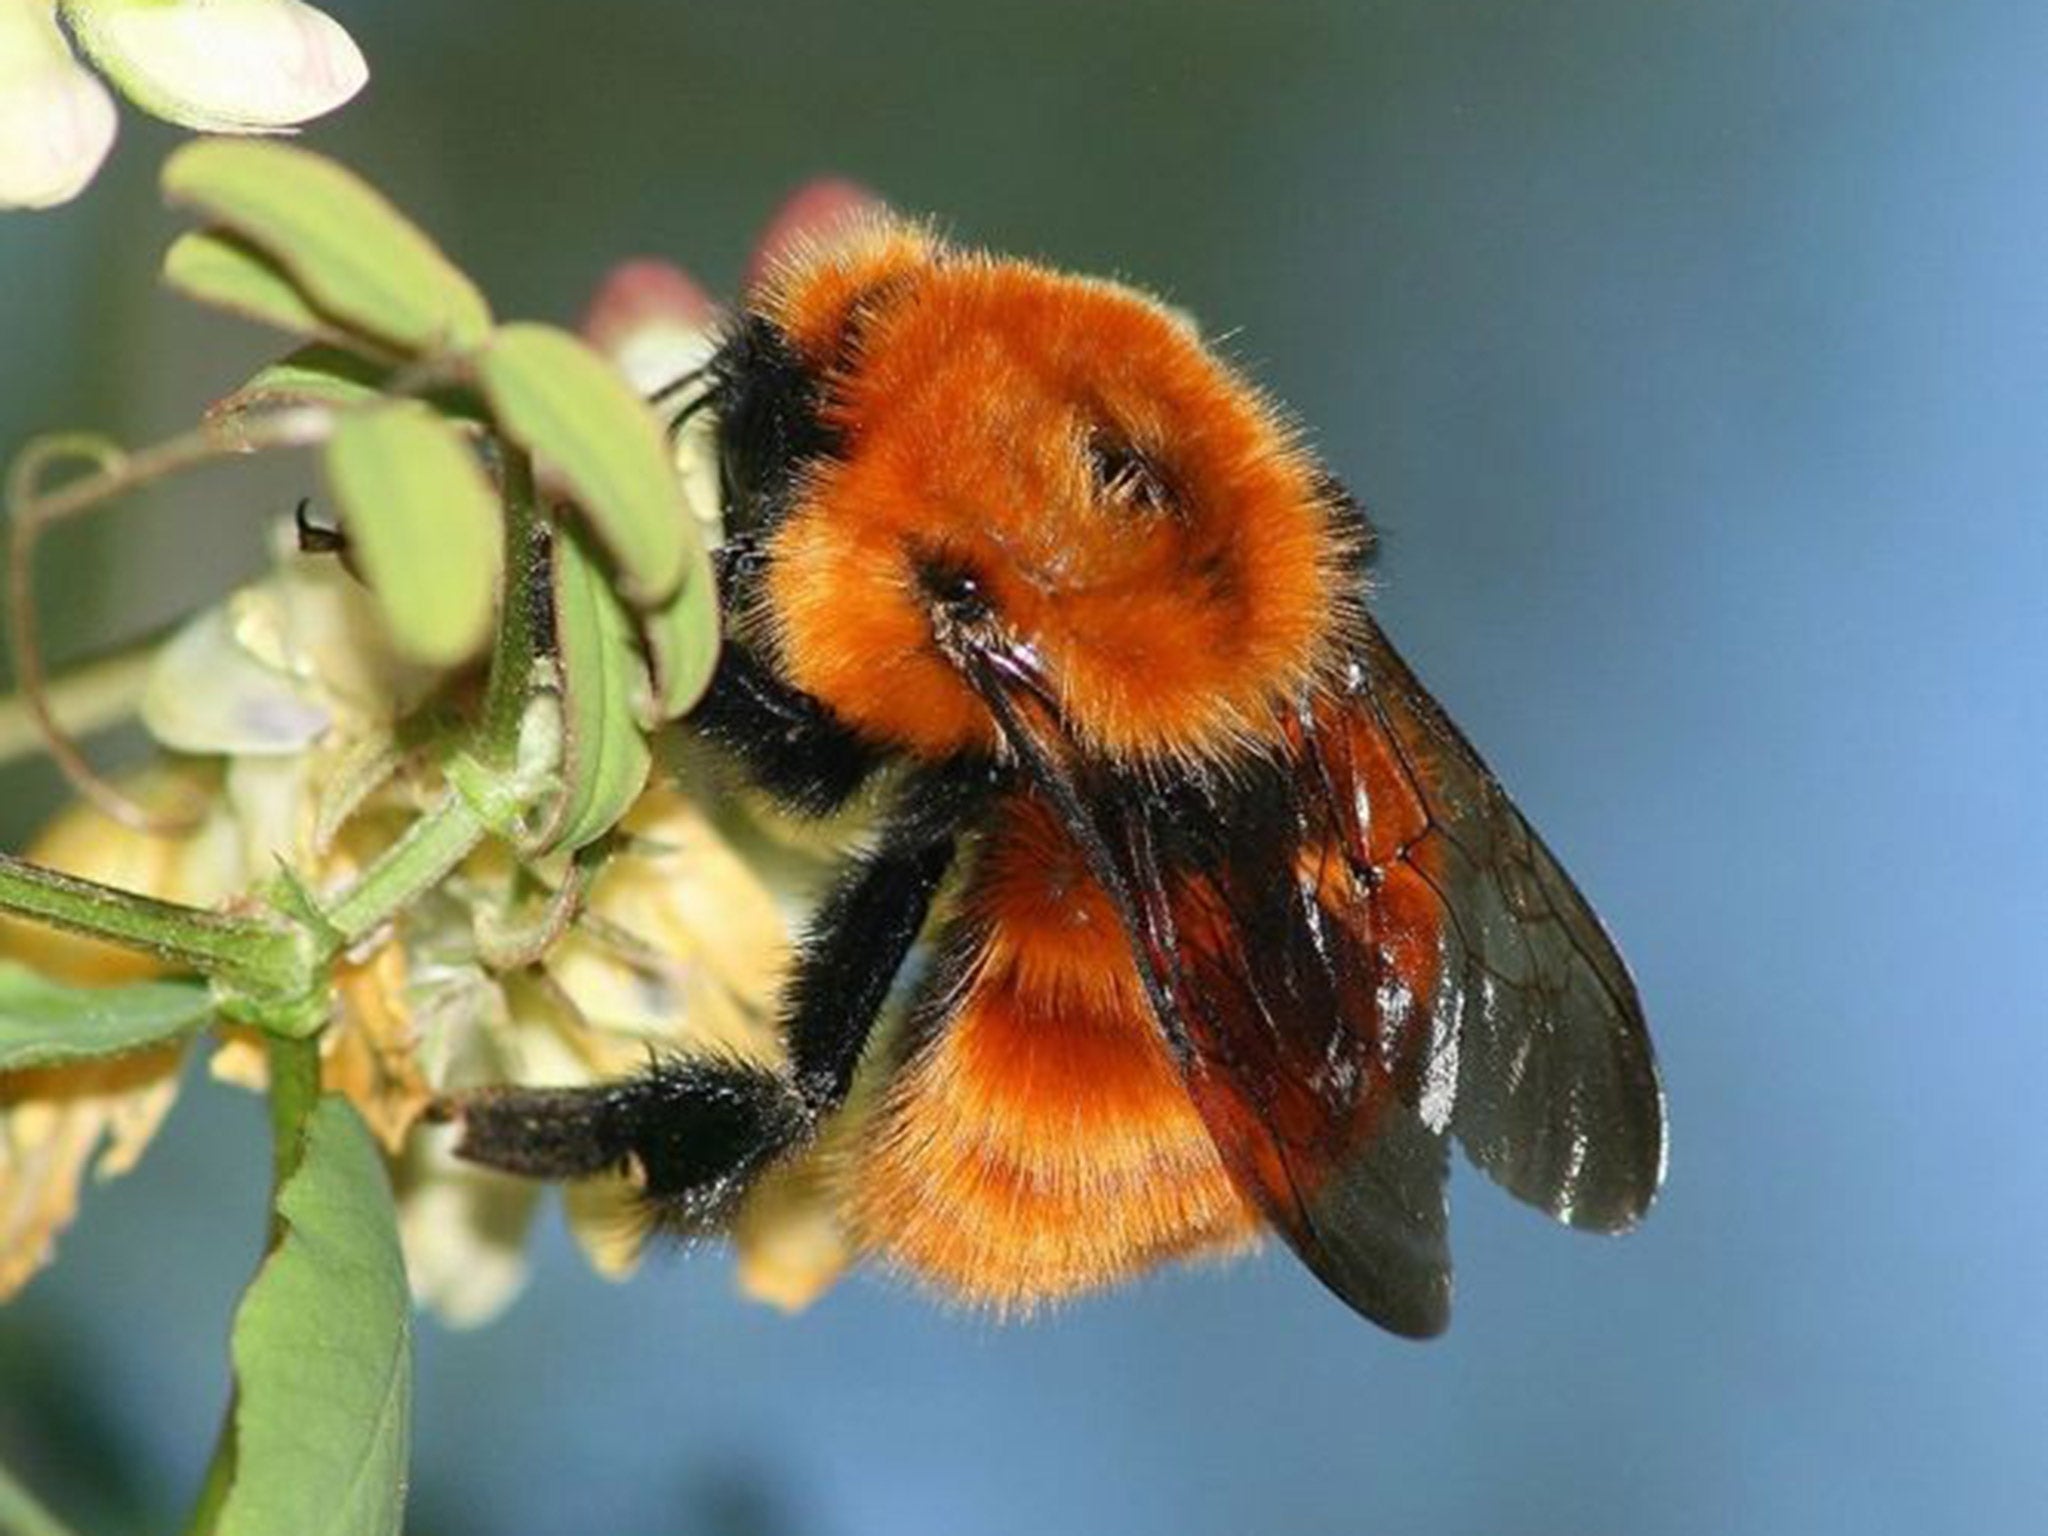 Bombus dahlbomii largest bumblebee in world from Chile